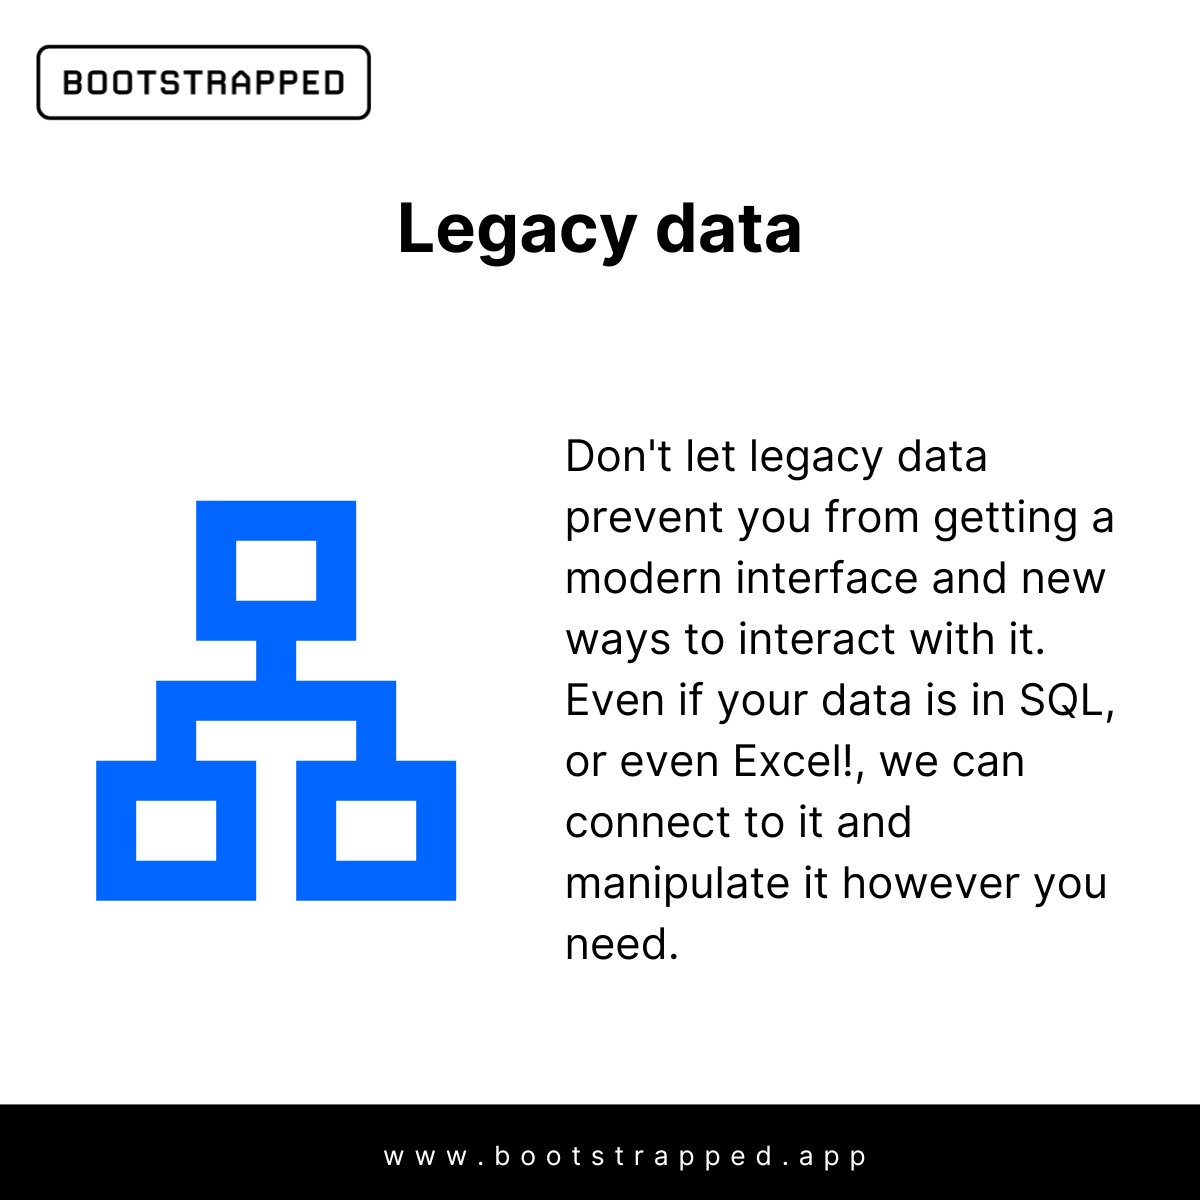 Unlock Legacy Data: No-Code for cost-effective, quick, and collaborative data management. 

Discover @BootstrappedMVP's solutions through No-Code approach.

#NoCode #LegacyData #BootstrappedSolutions #DataManagement #DataHandling